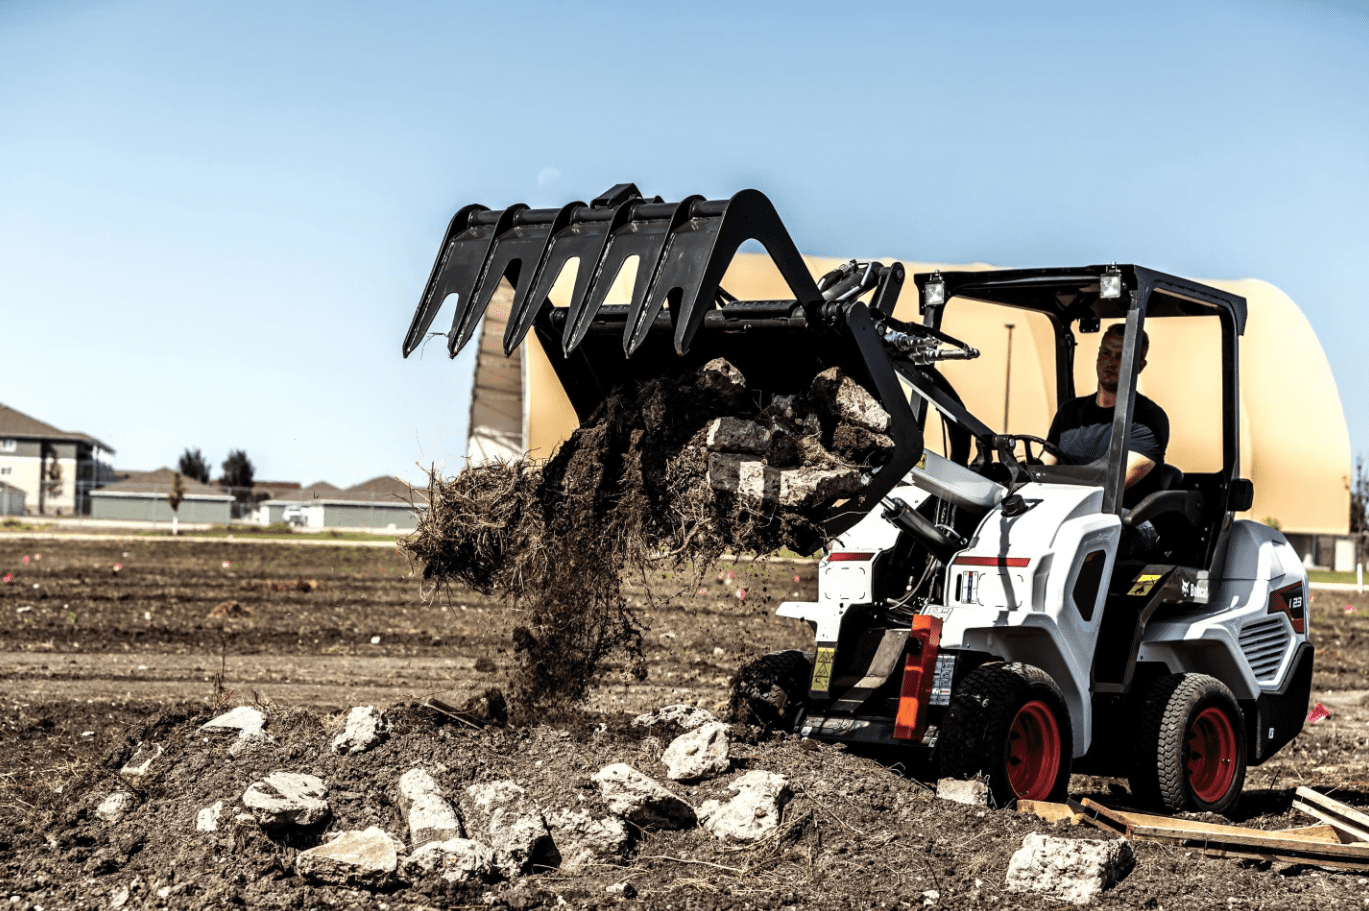 Browse Specs and more for the L23 Small Articulated Loader - White Star Machinery